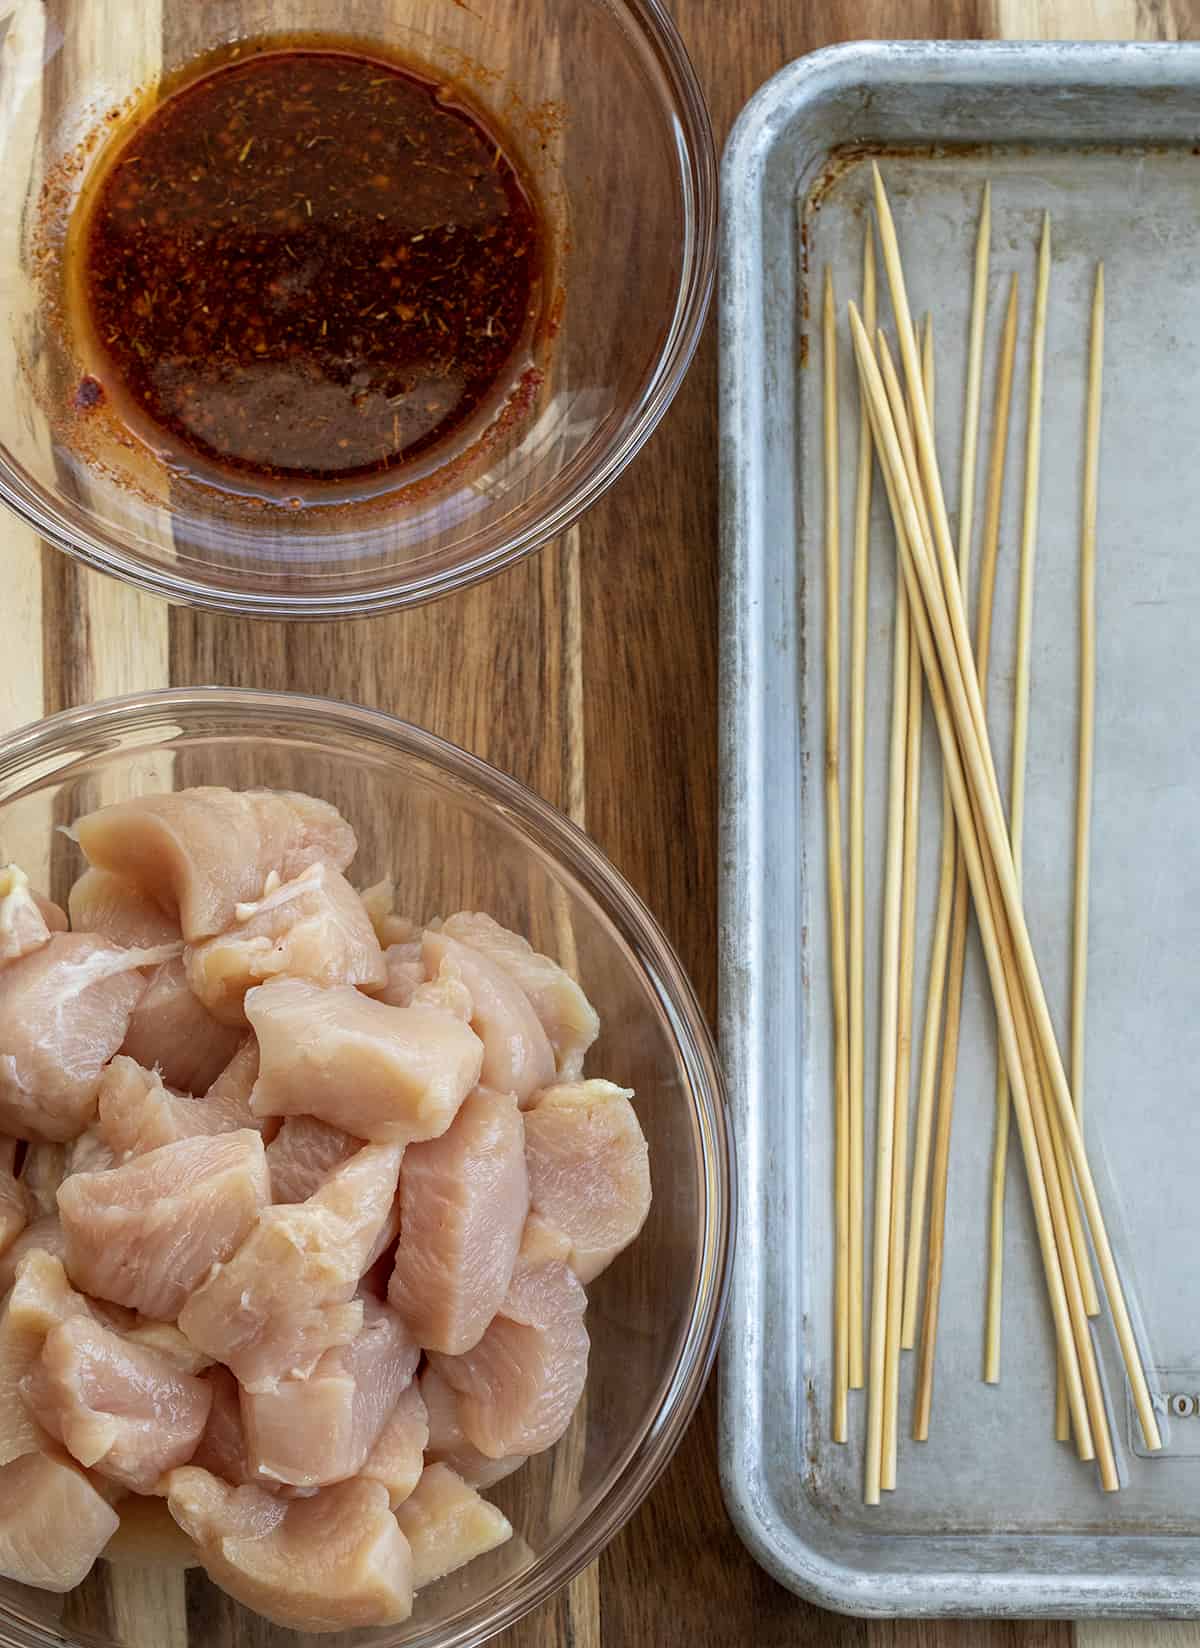 Chicken, Sauce, and Skewers Soaking in Water.